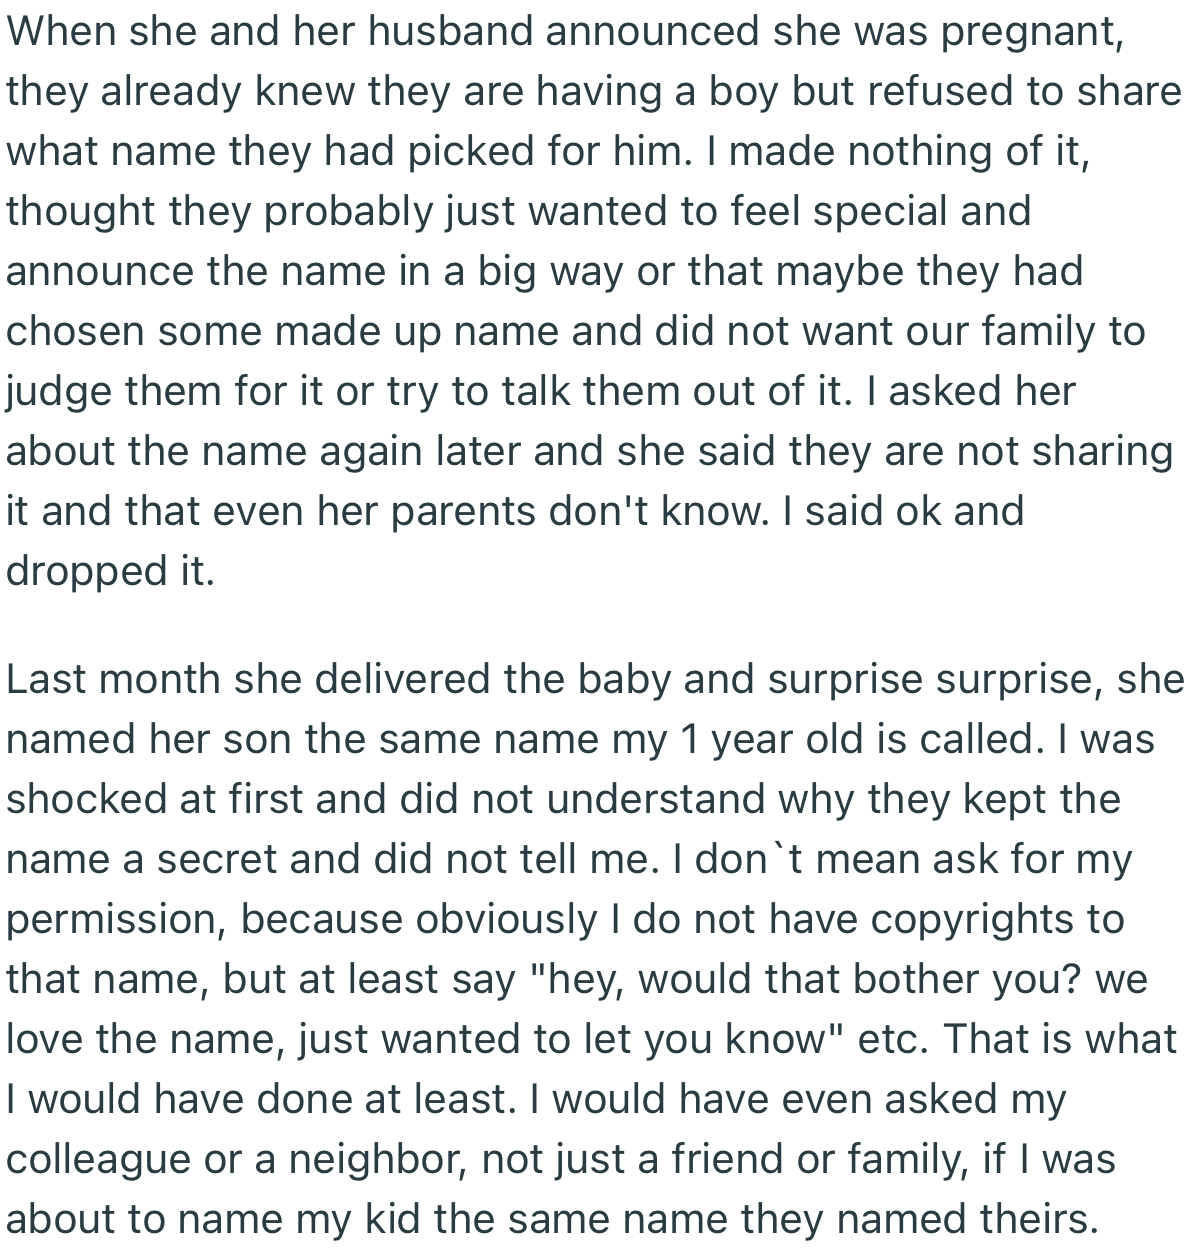 OP was shocked to find out that her cousin and her husband gave their newborn the same name as her 1-year-old son